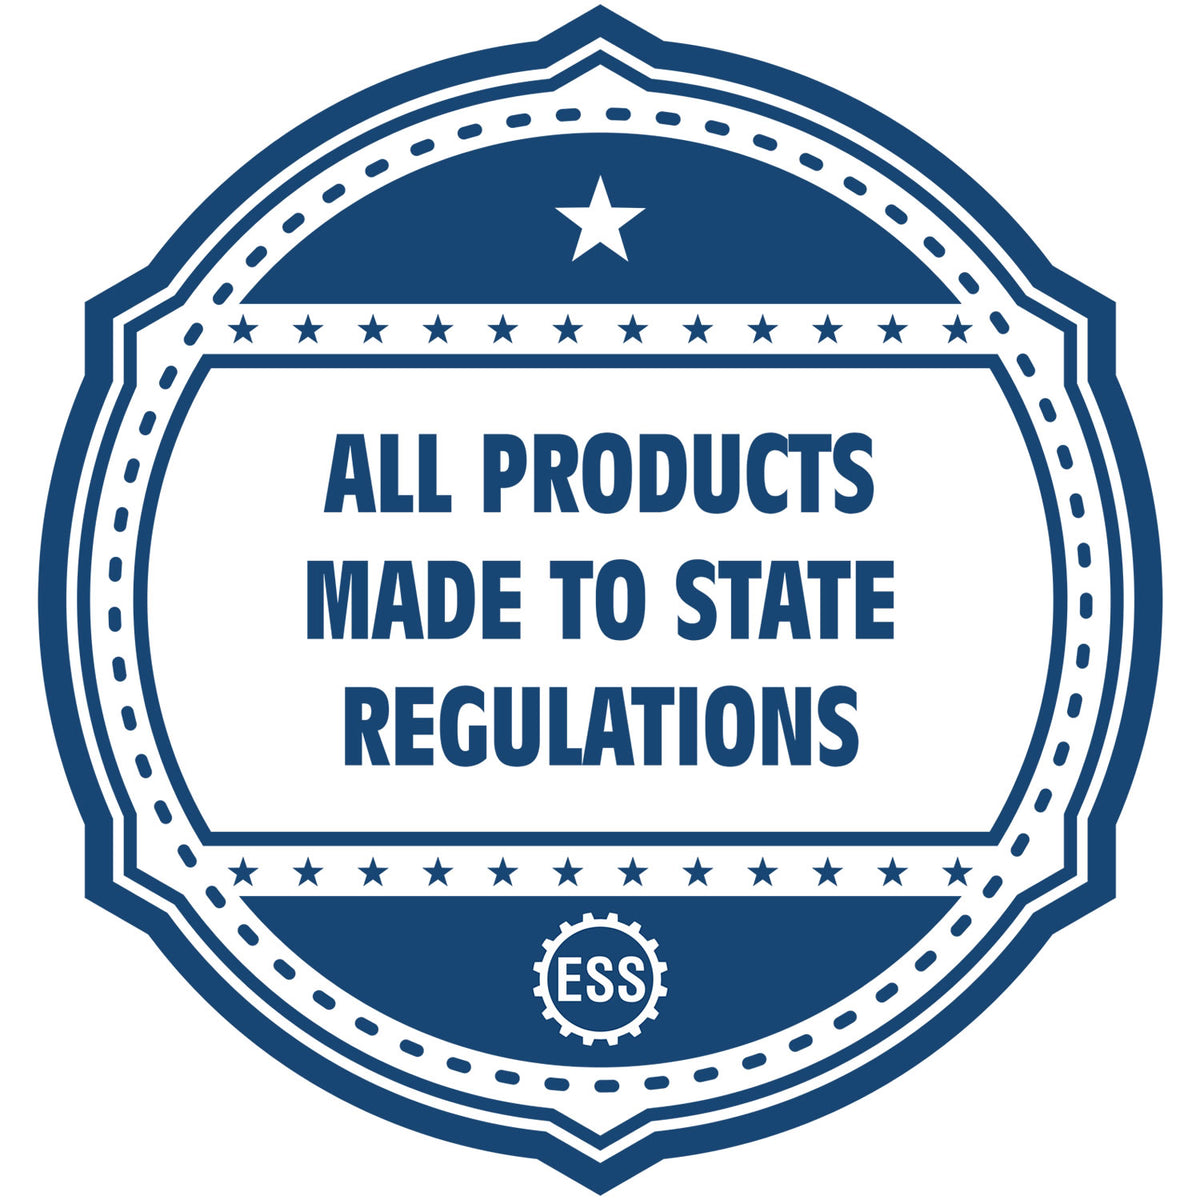 An icon or badge element for the Soft New Mexico Professional Engineer Seal showing that this product is made in compliance with state regulations.